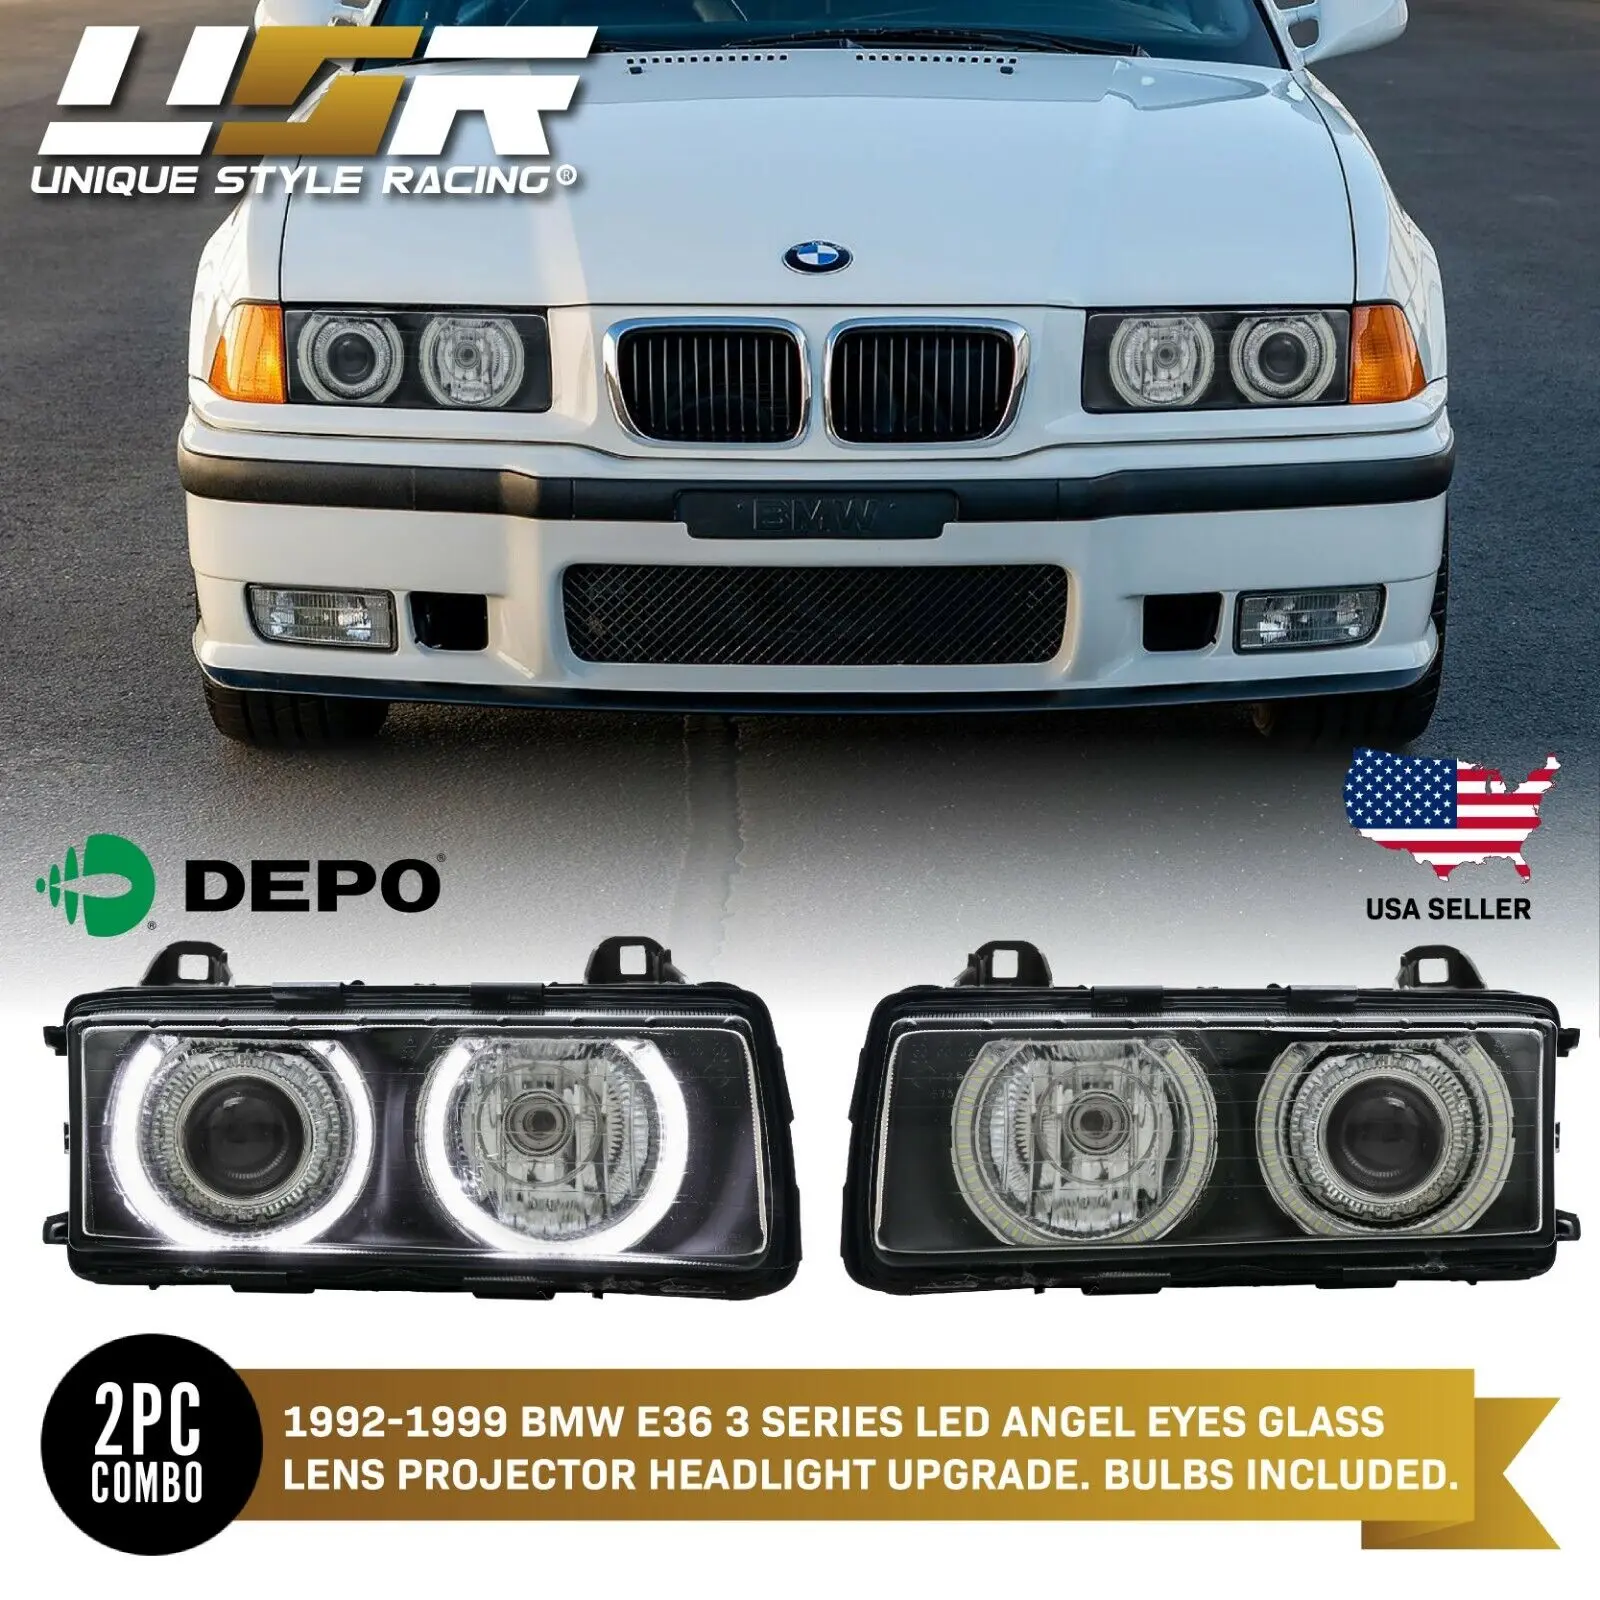 e36 smoked headlights - What is the part number of the E36 headlight